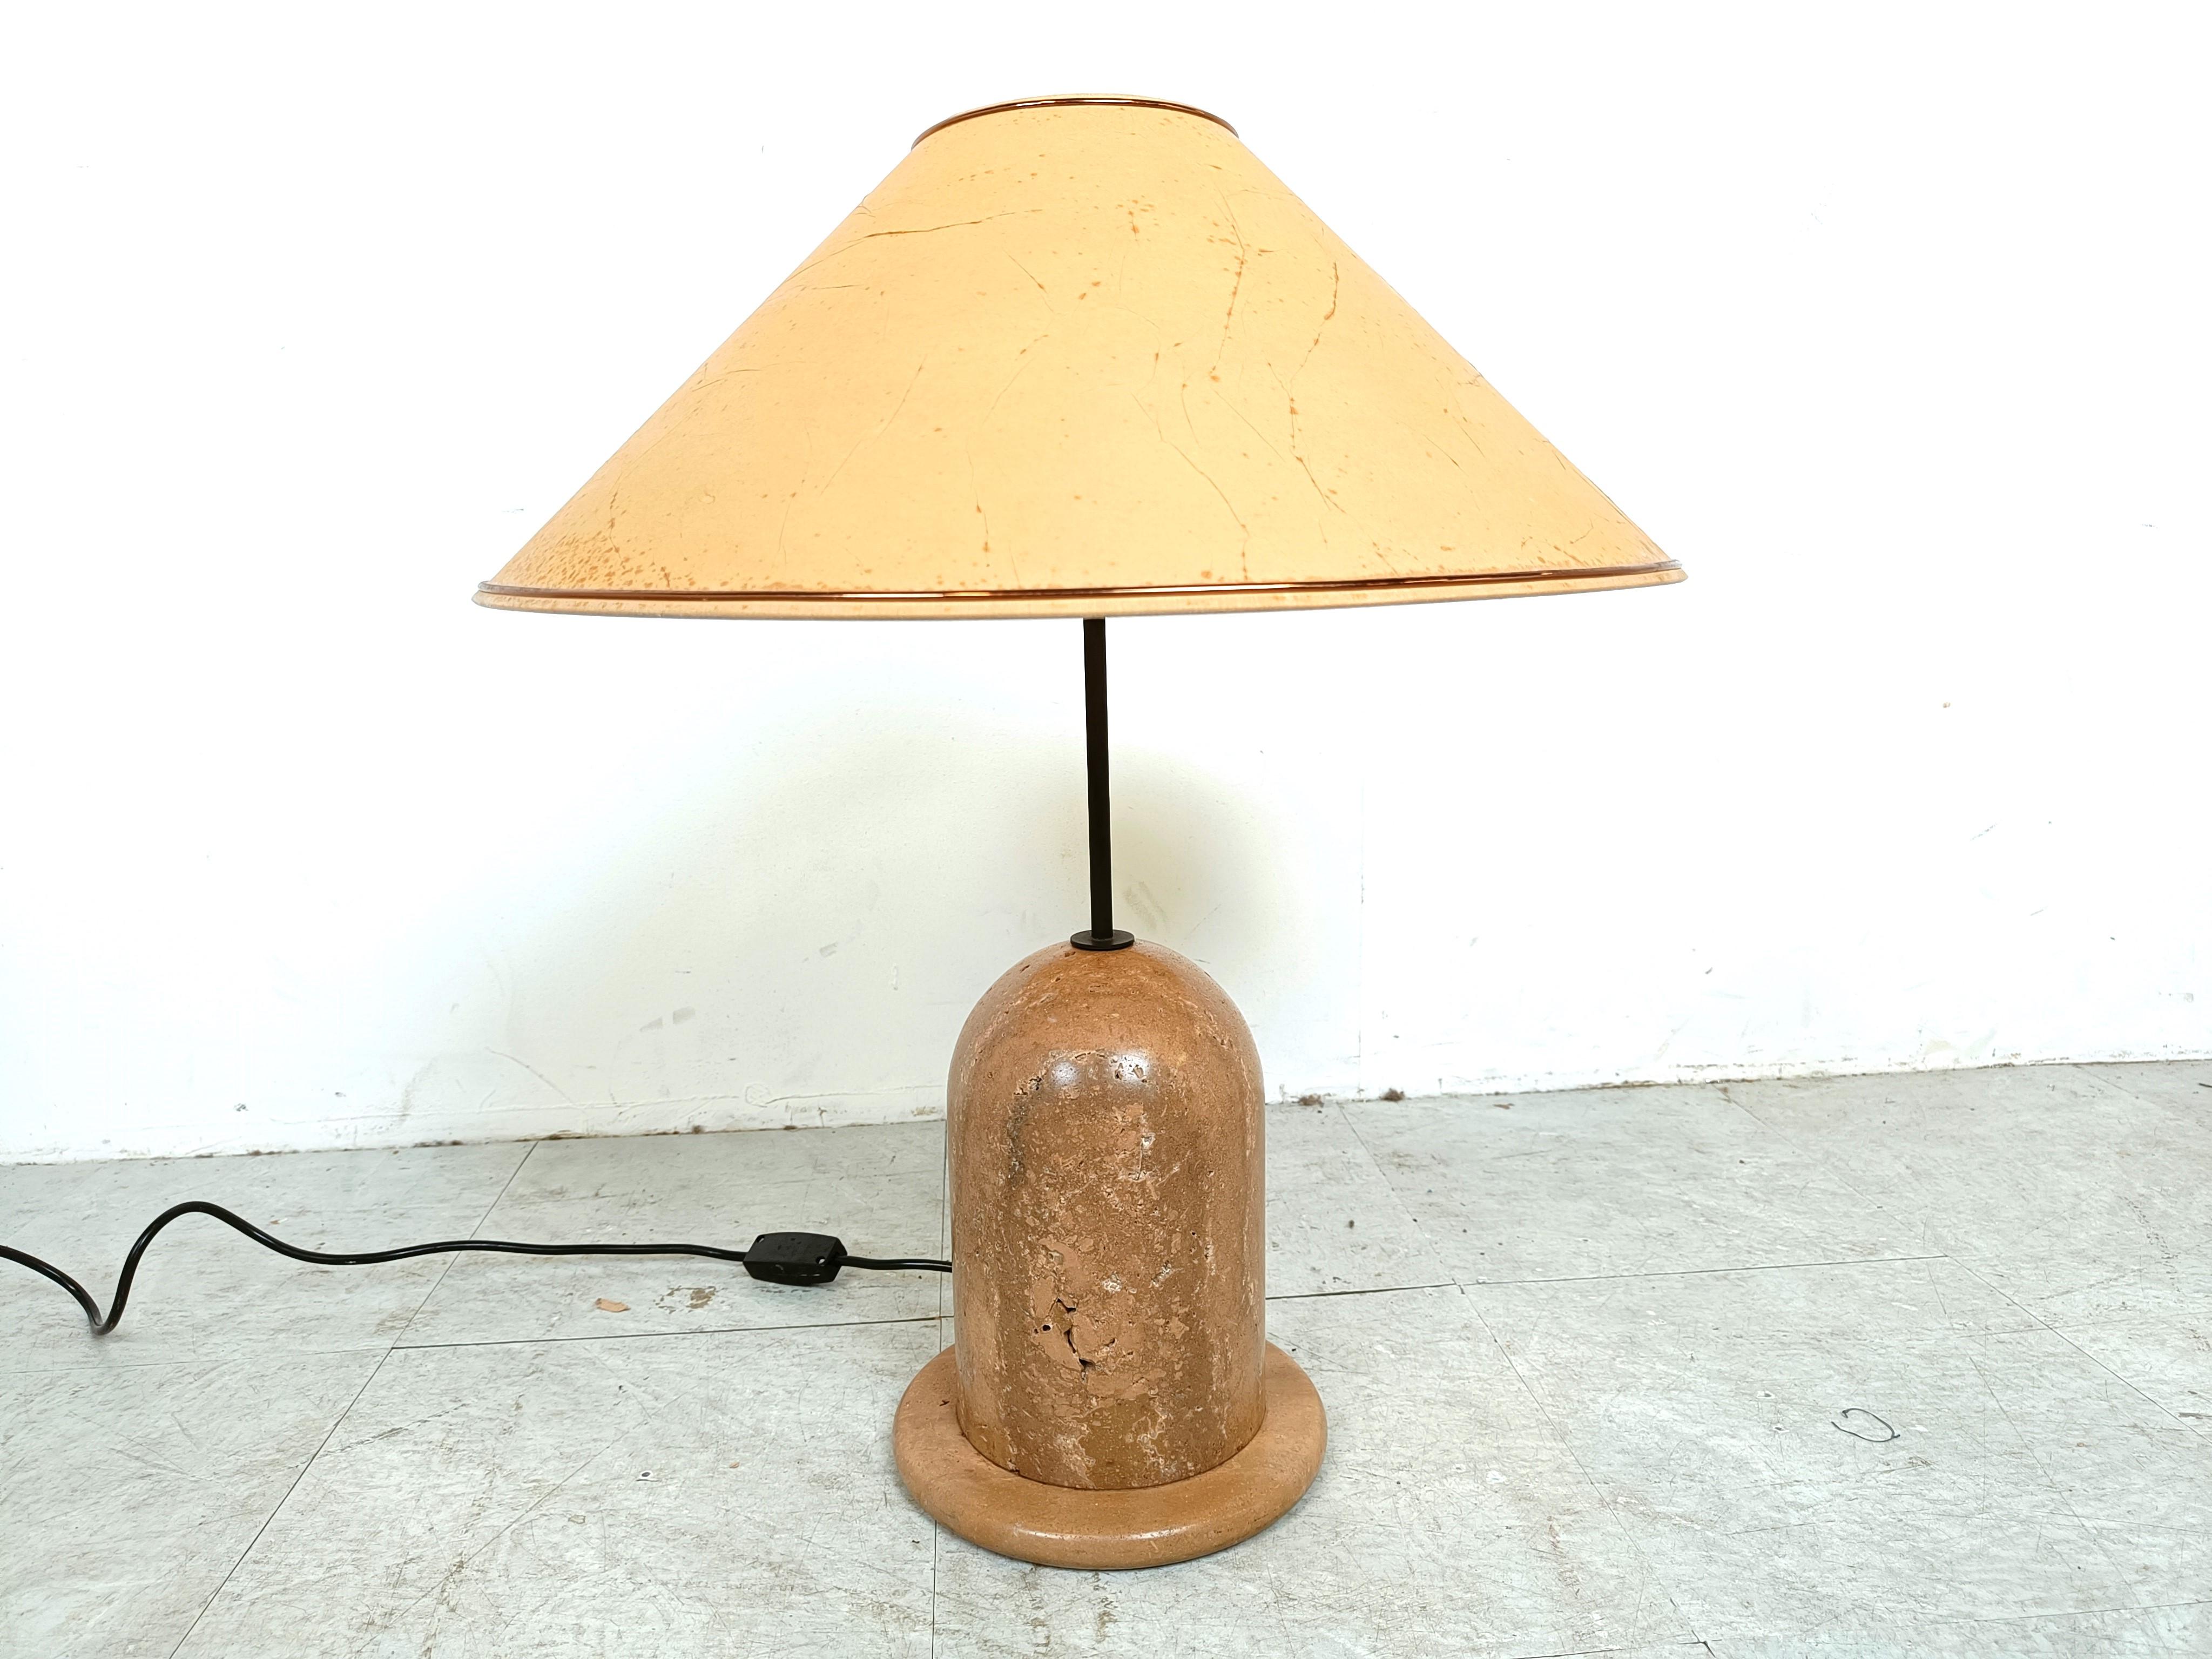 Charming polished solid travertine table lamp with its original seventiers lamp shade.

Good condition, tested with a E27 light bulb

Dimensions:
Height 60cm/23.62